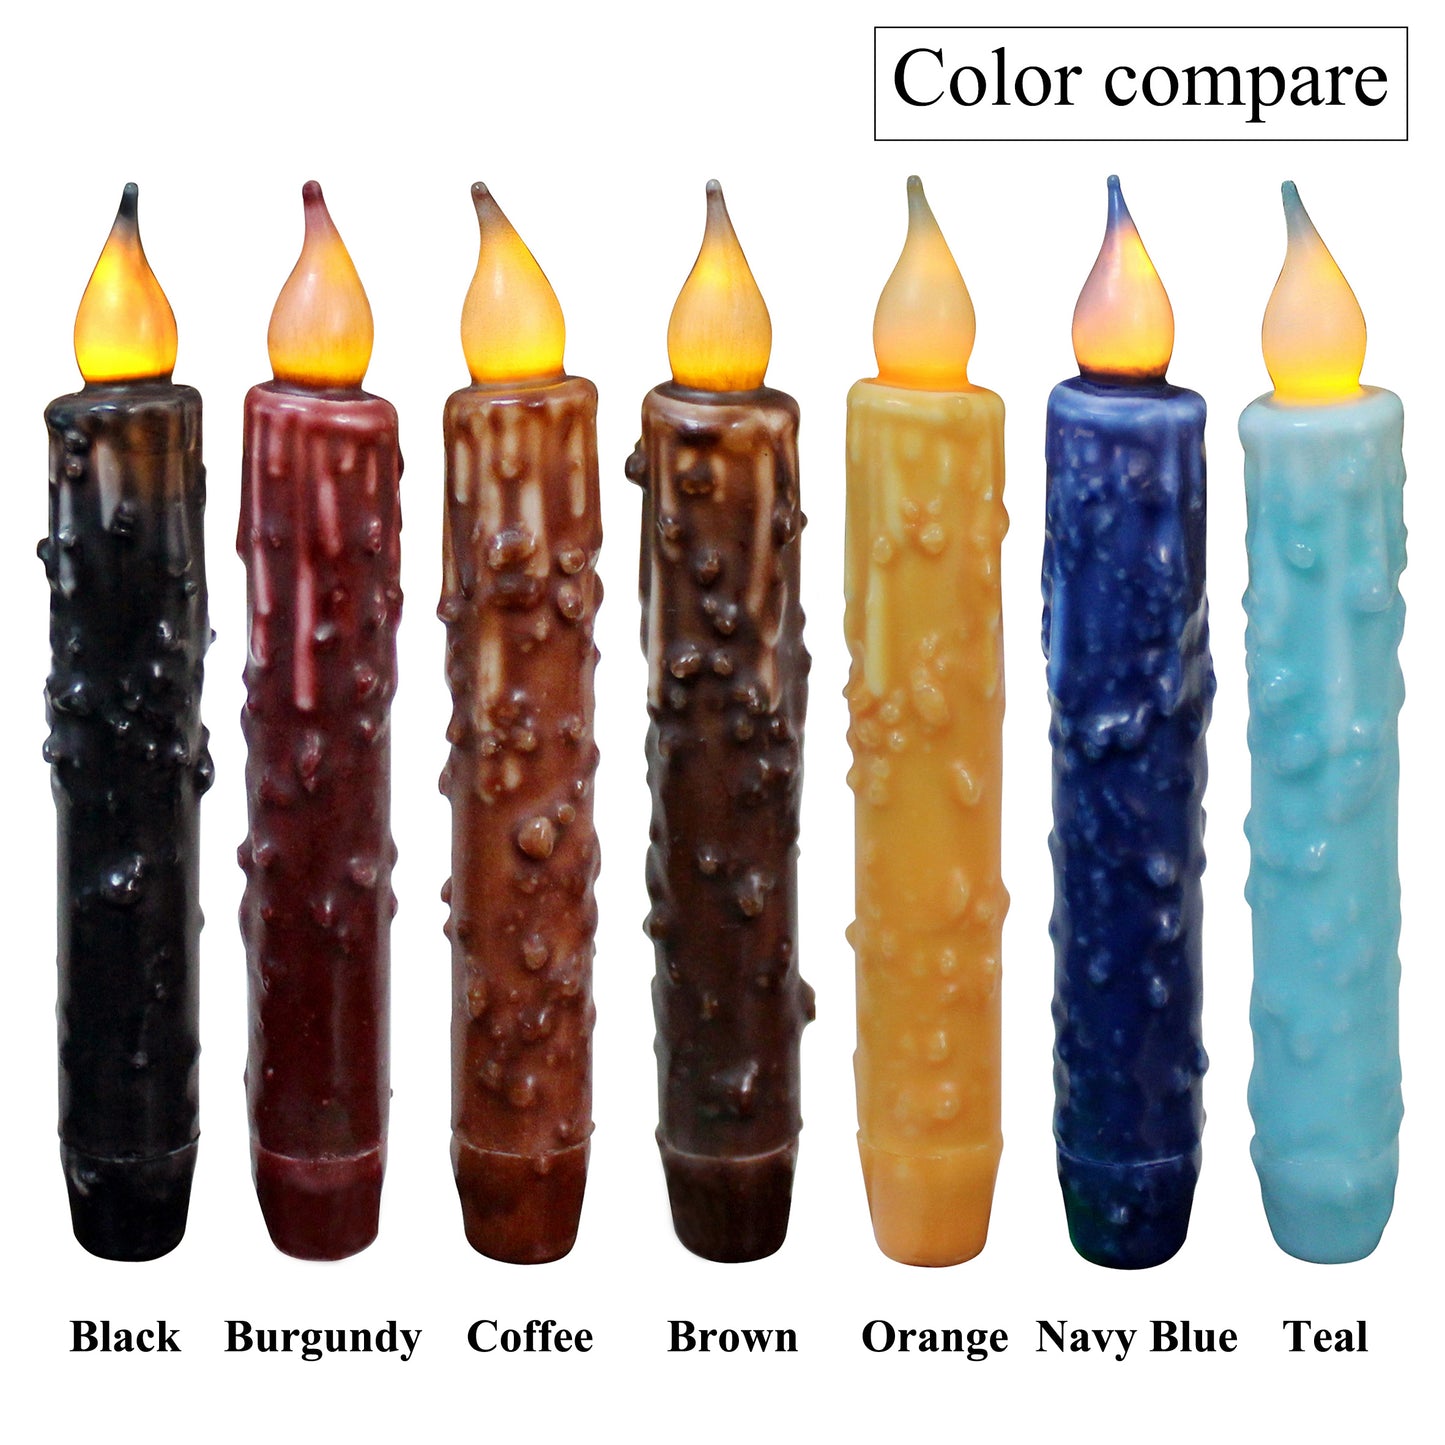 CVHOMEDECO. Real Wax Hand Dipped Battery Operated LED Timer Taper Candles Rustic Primitive Flameless Lights Décor, 6.75 Inch, Brwon, 6 PCS in a Package